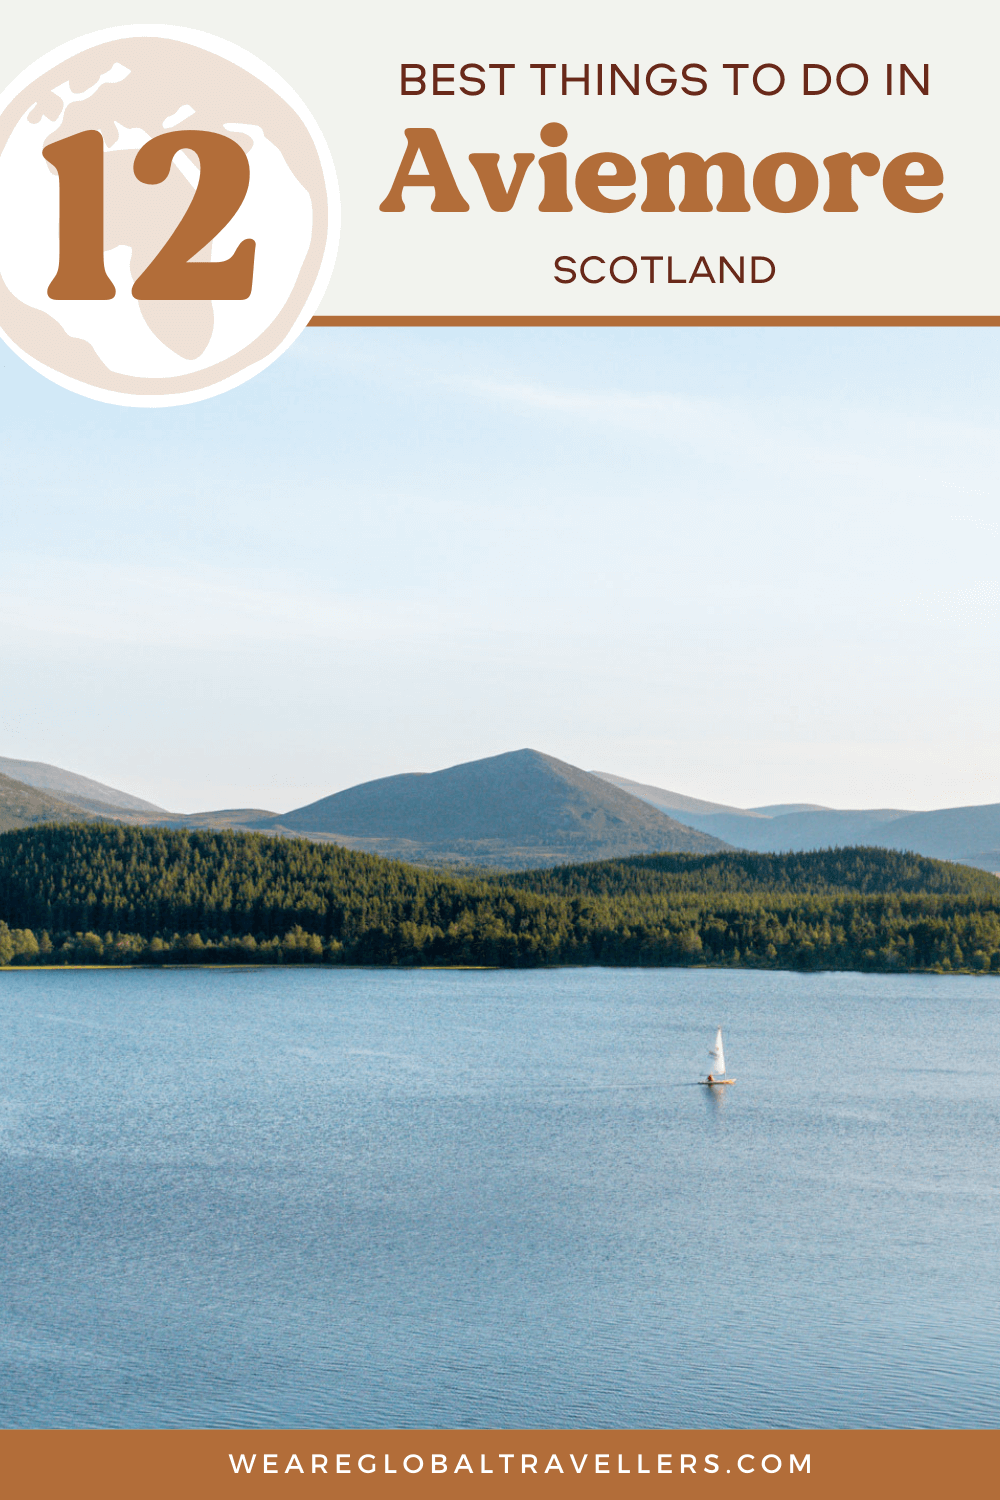 The best things to do in Aviemore, Scotland